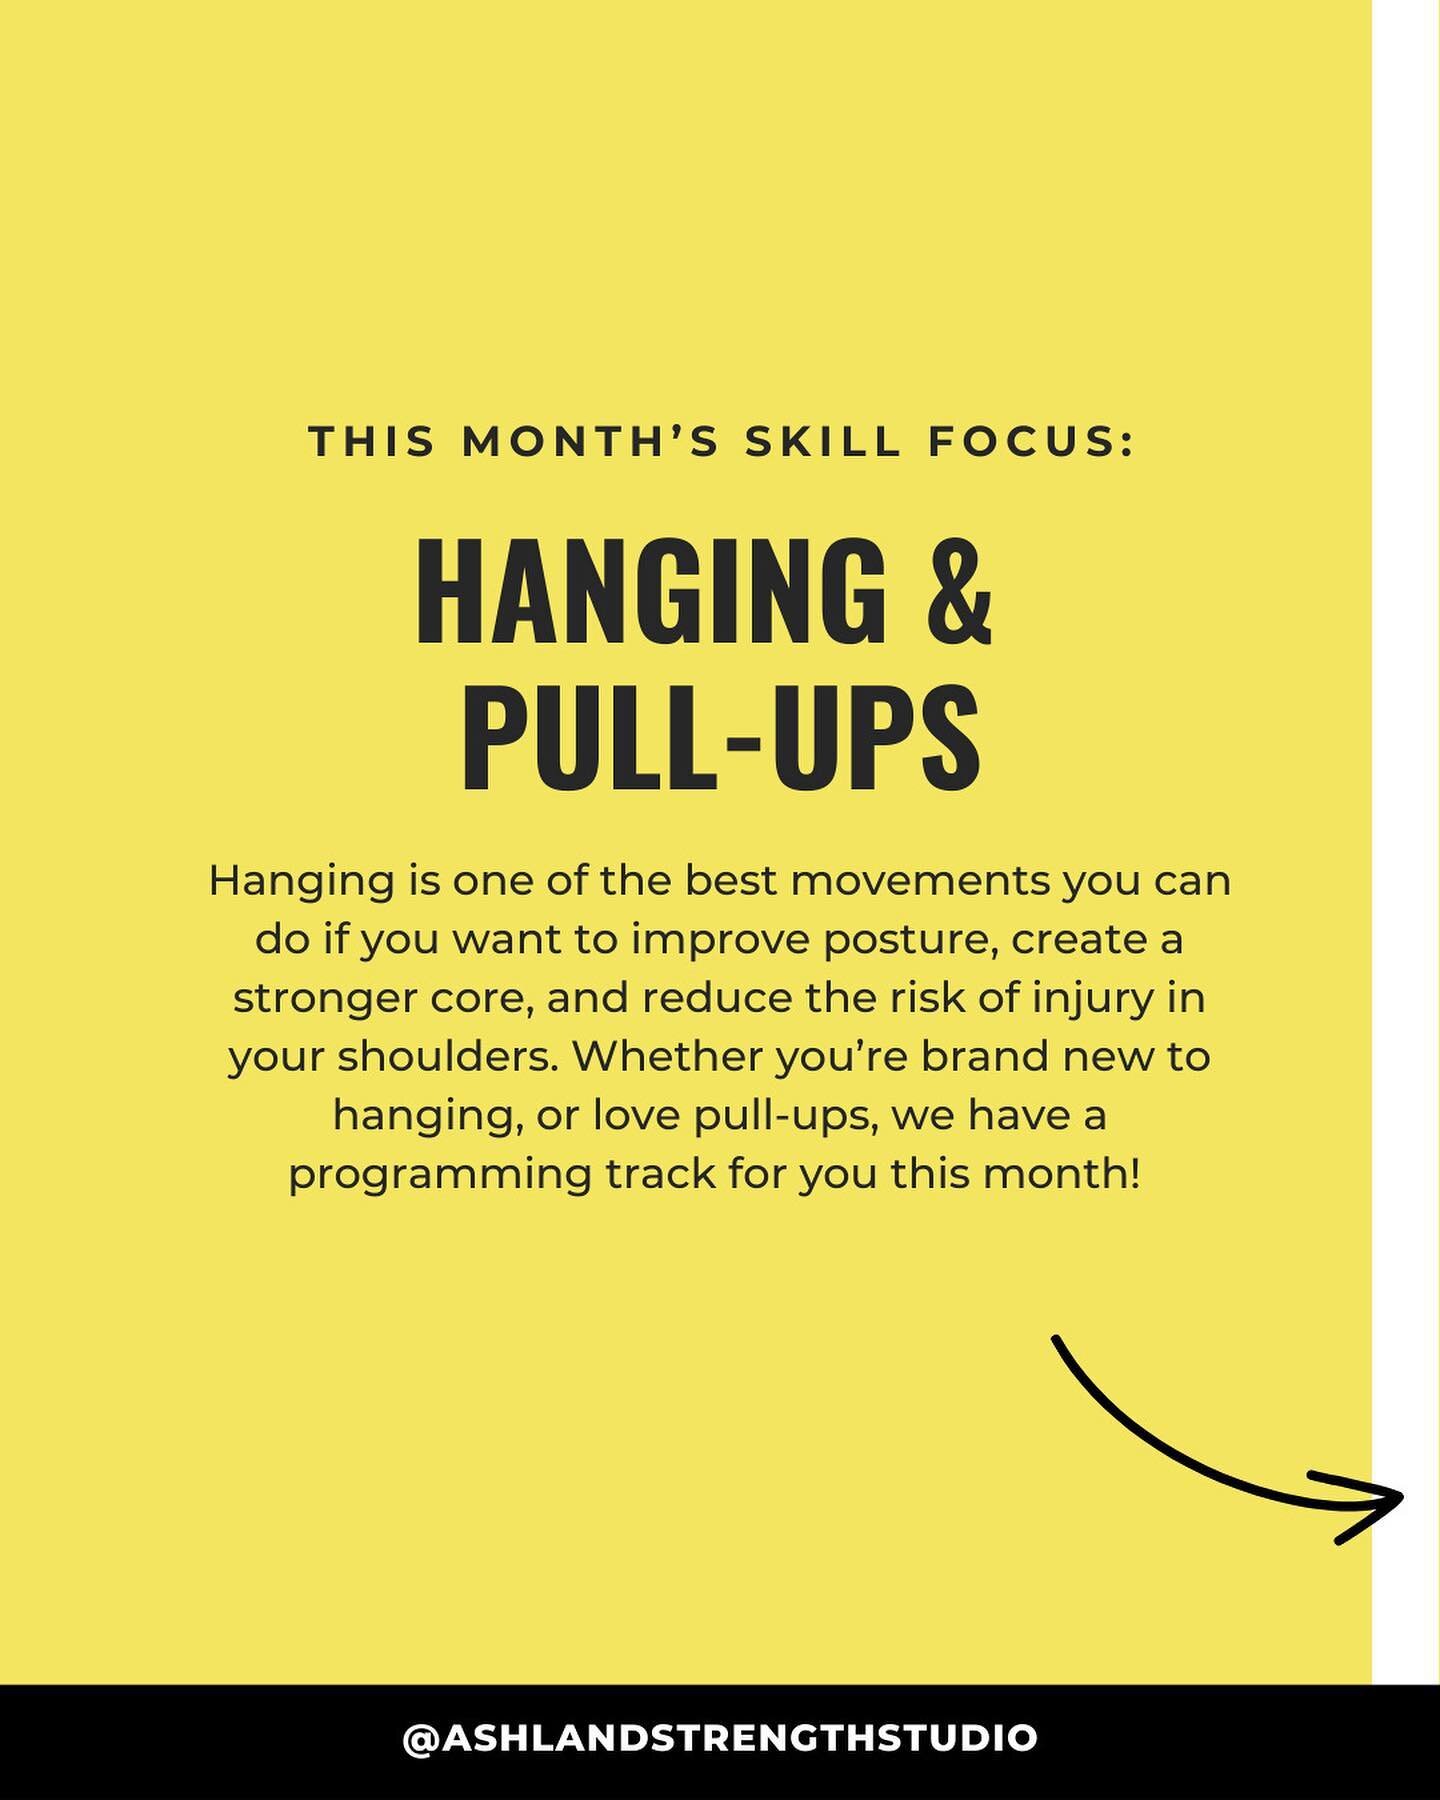 In April, we're focusing on hanging and pull-ups in small group training! Hanging is one of the best movements you can do if you want to improve posture, create a stronger core, and reduce the risk of injury in your shoulders. Whether you&rsquo;re br